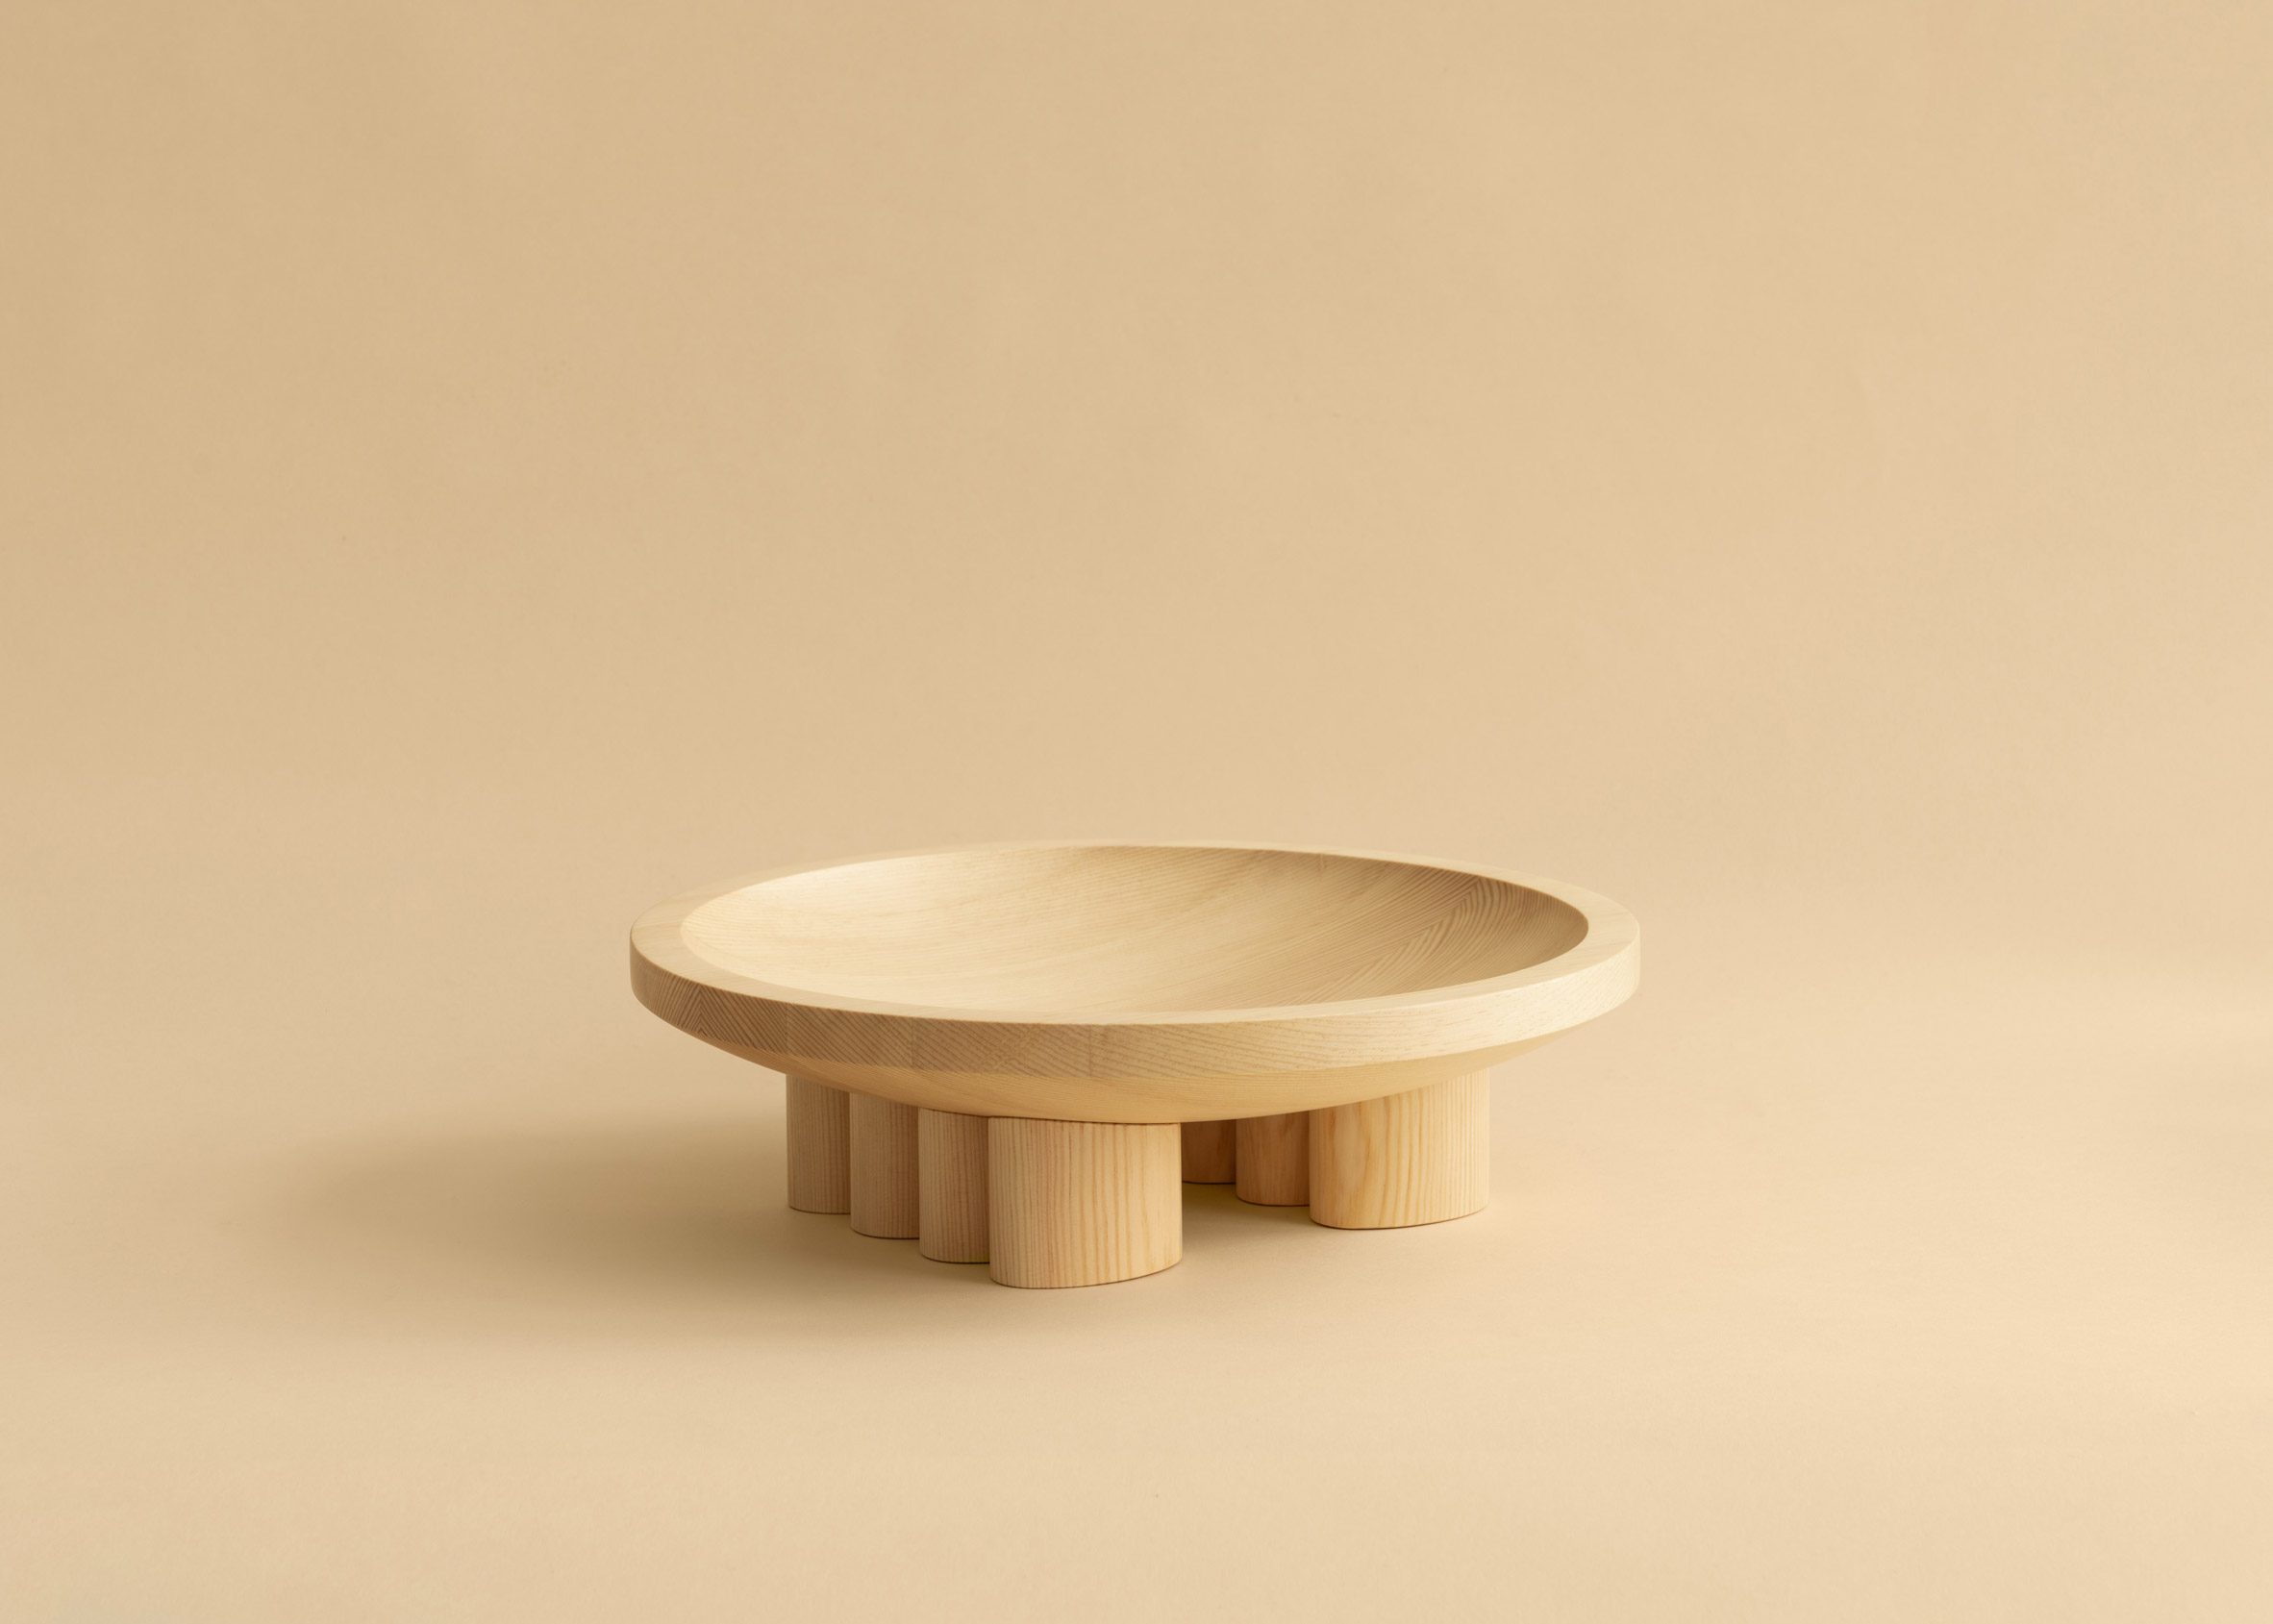 A wooden bowl by Mac Collins